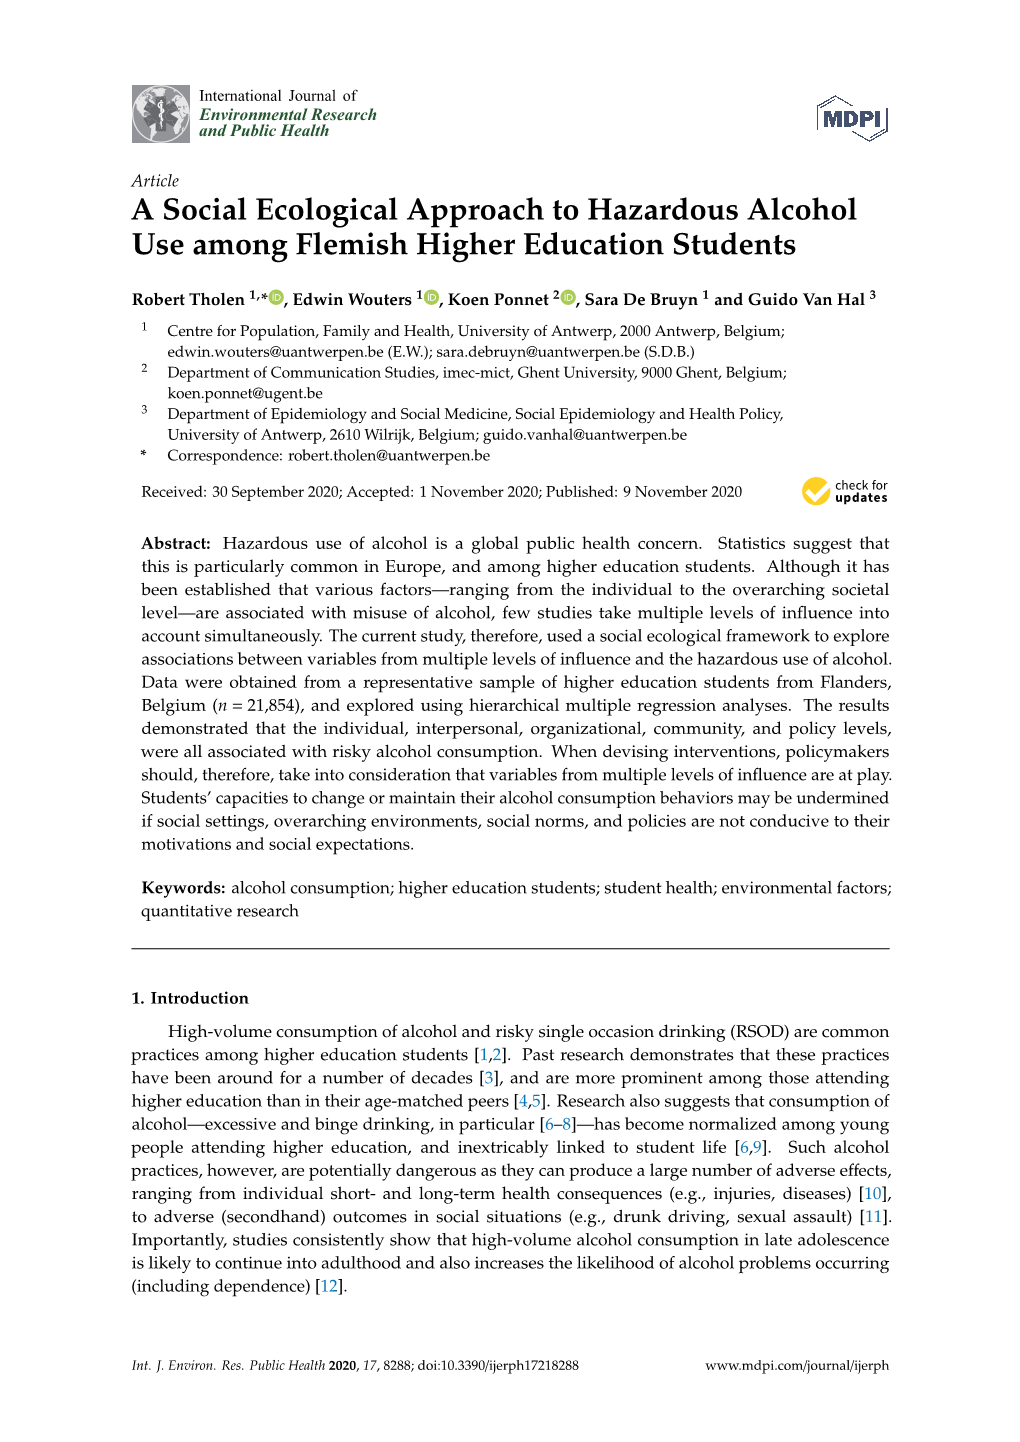 A Social Ecological Approach to Hazardous Alcohol Use Among Flemish Higher Education Students